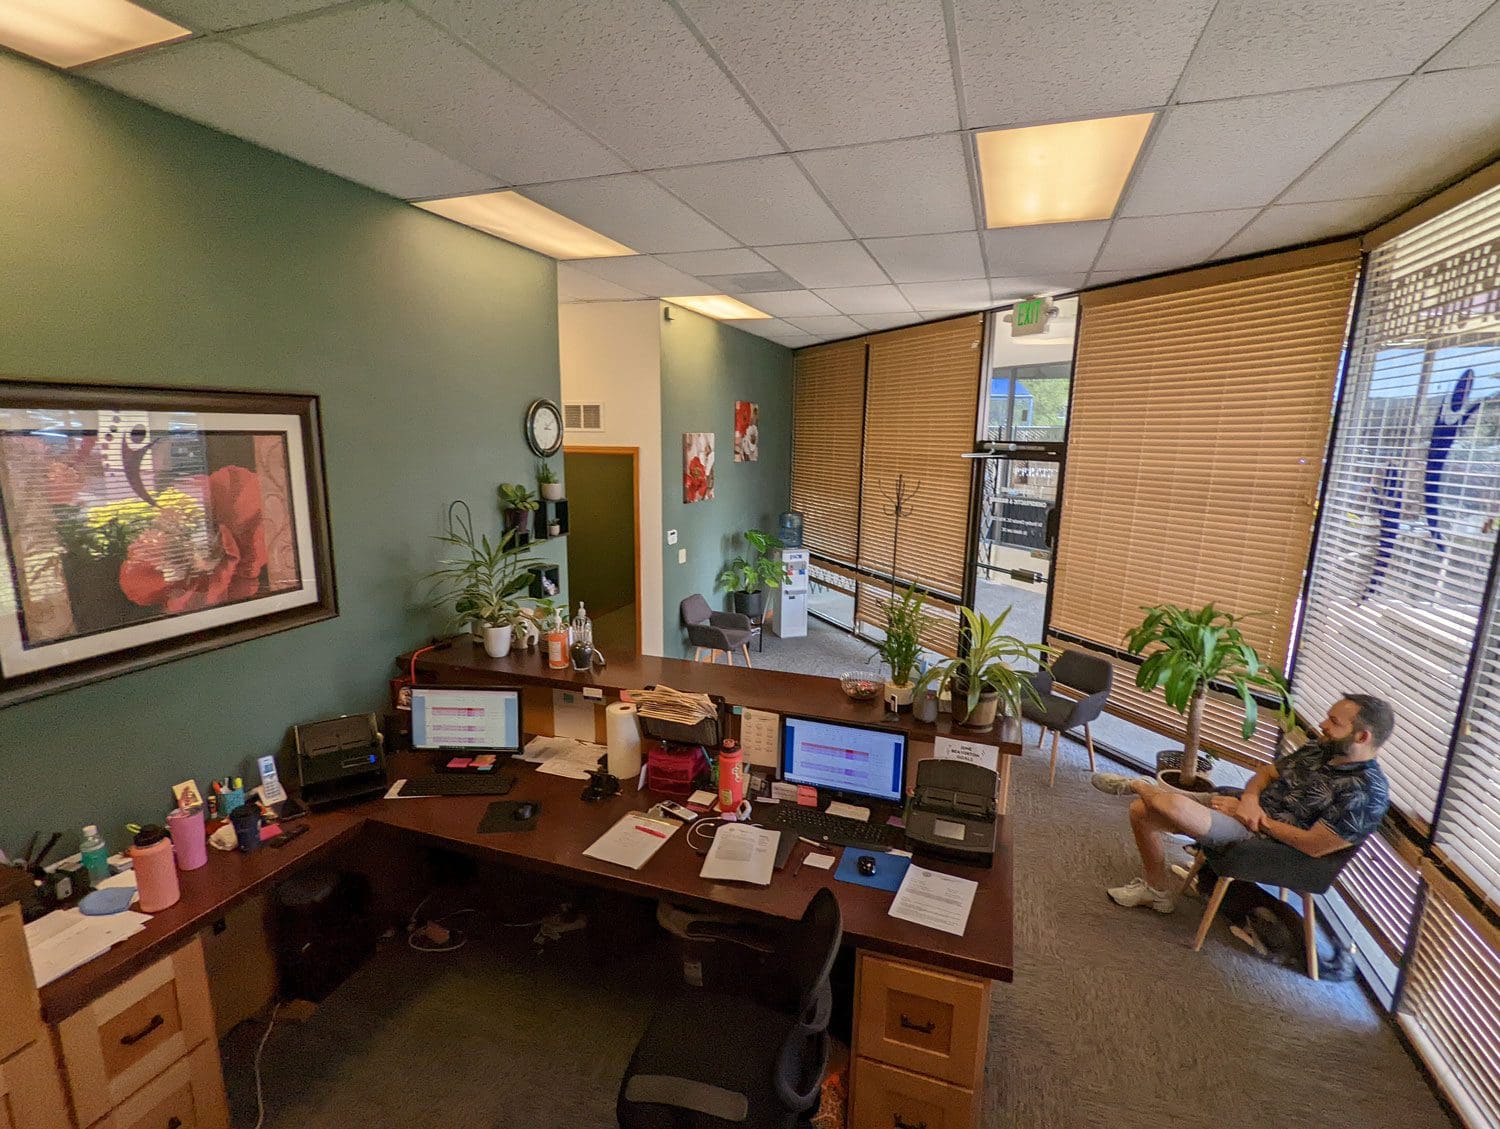 Beaverton Chiropractor front desk and reception area.